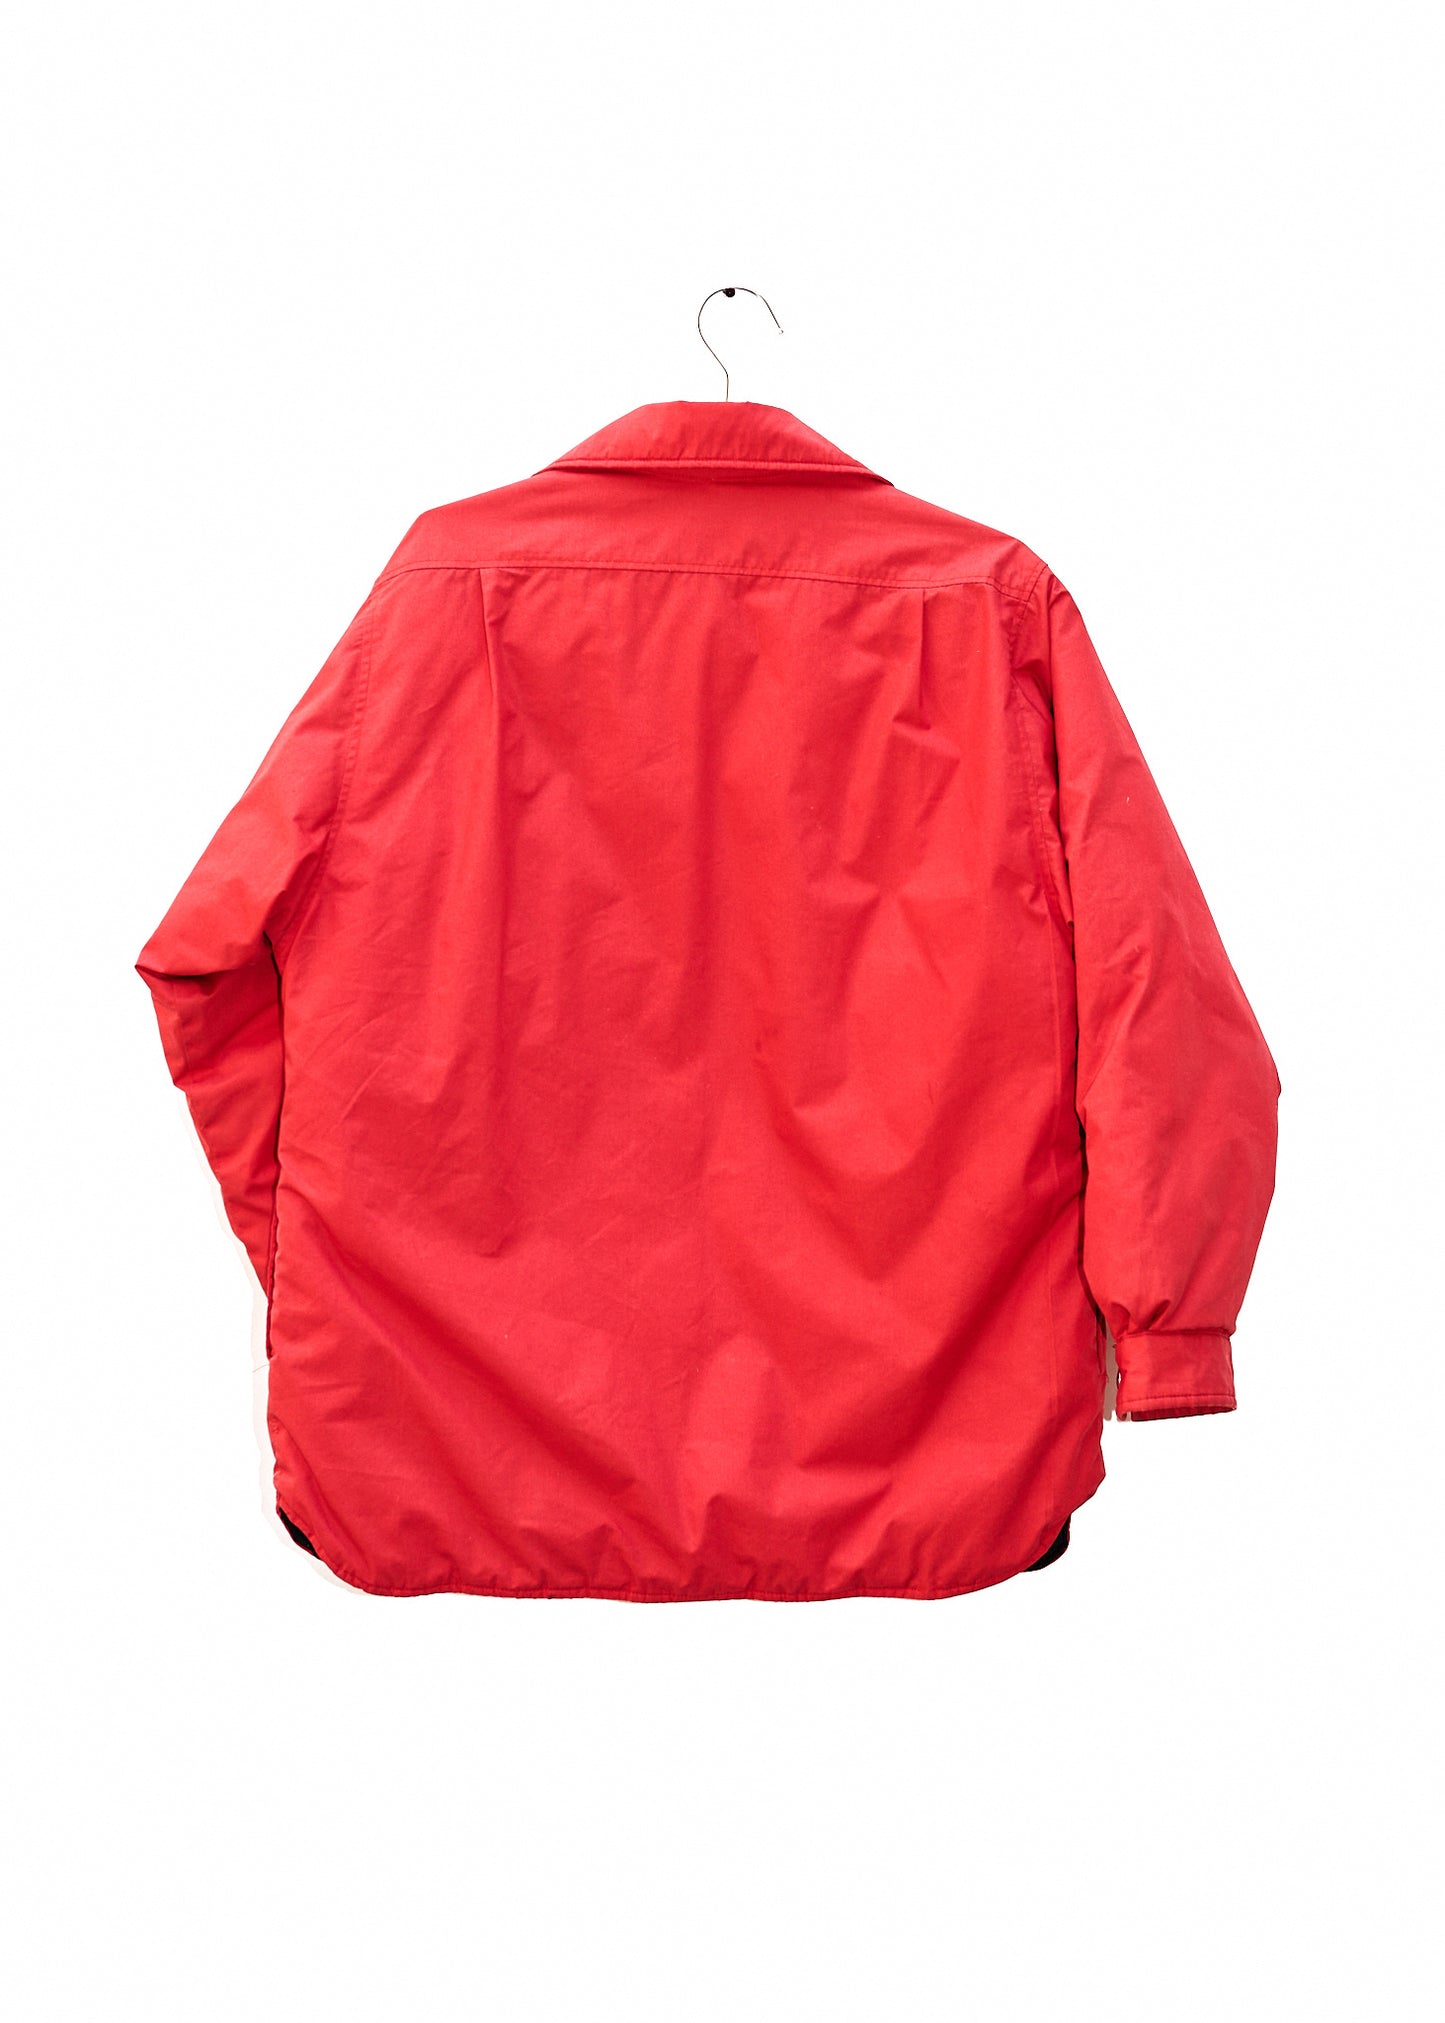 LL Bean Red Quilted Jacket